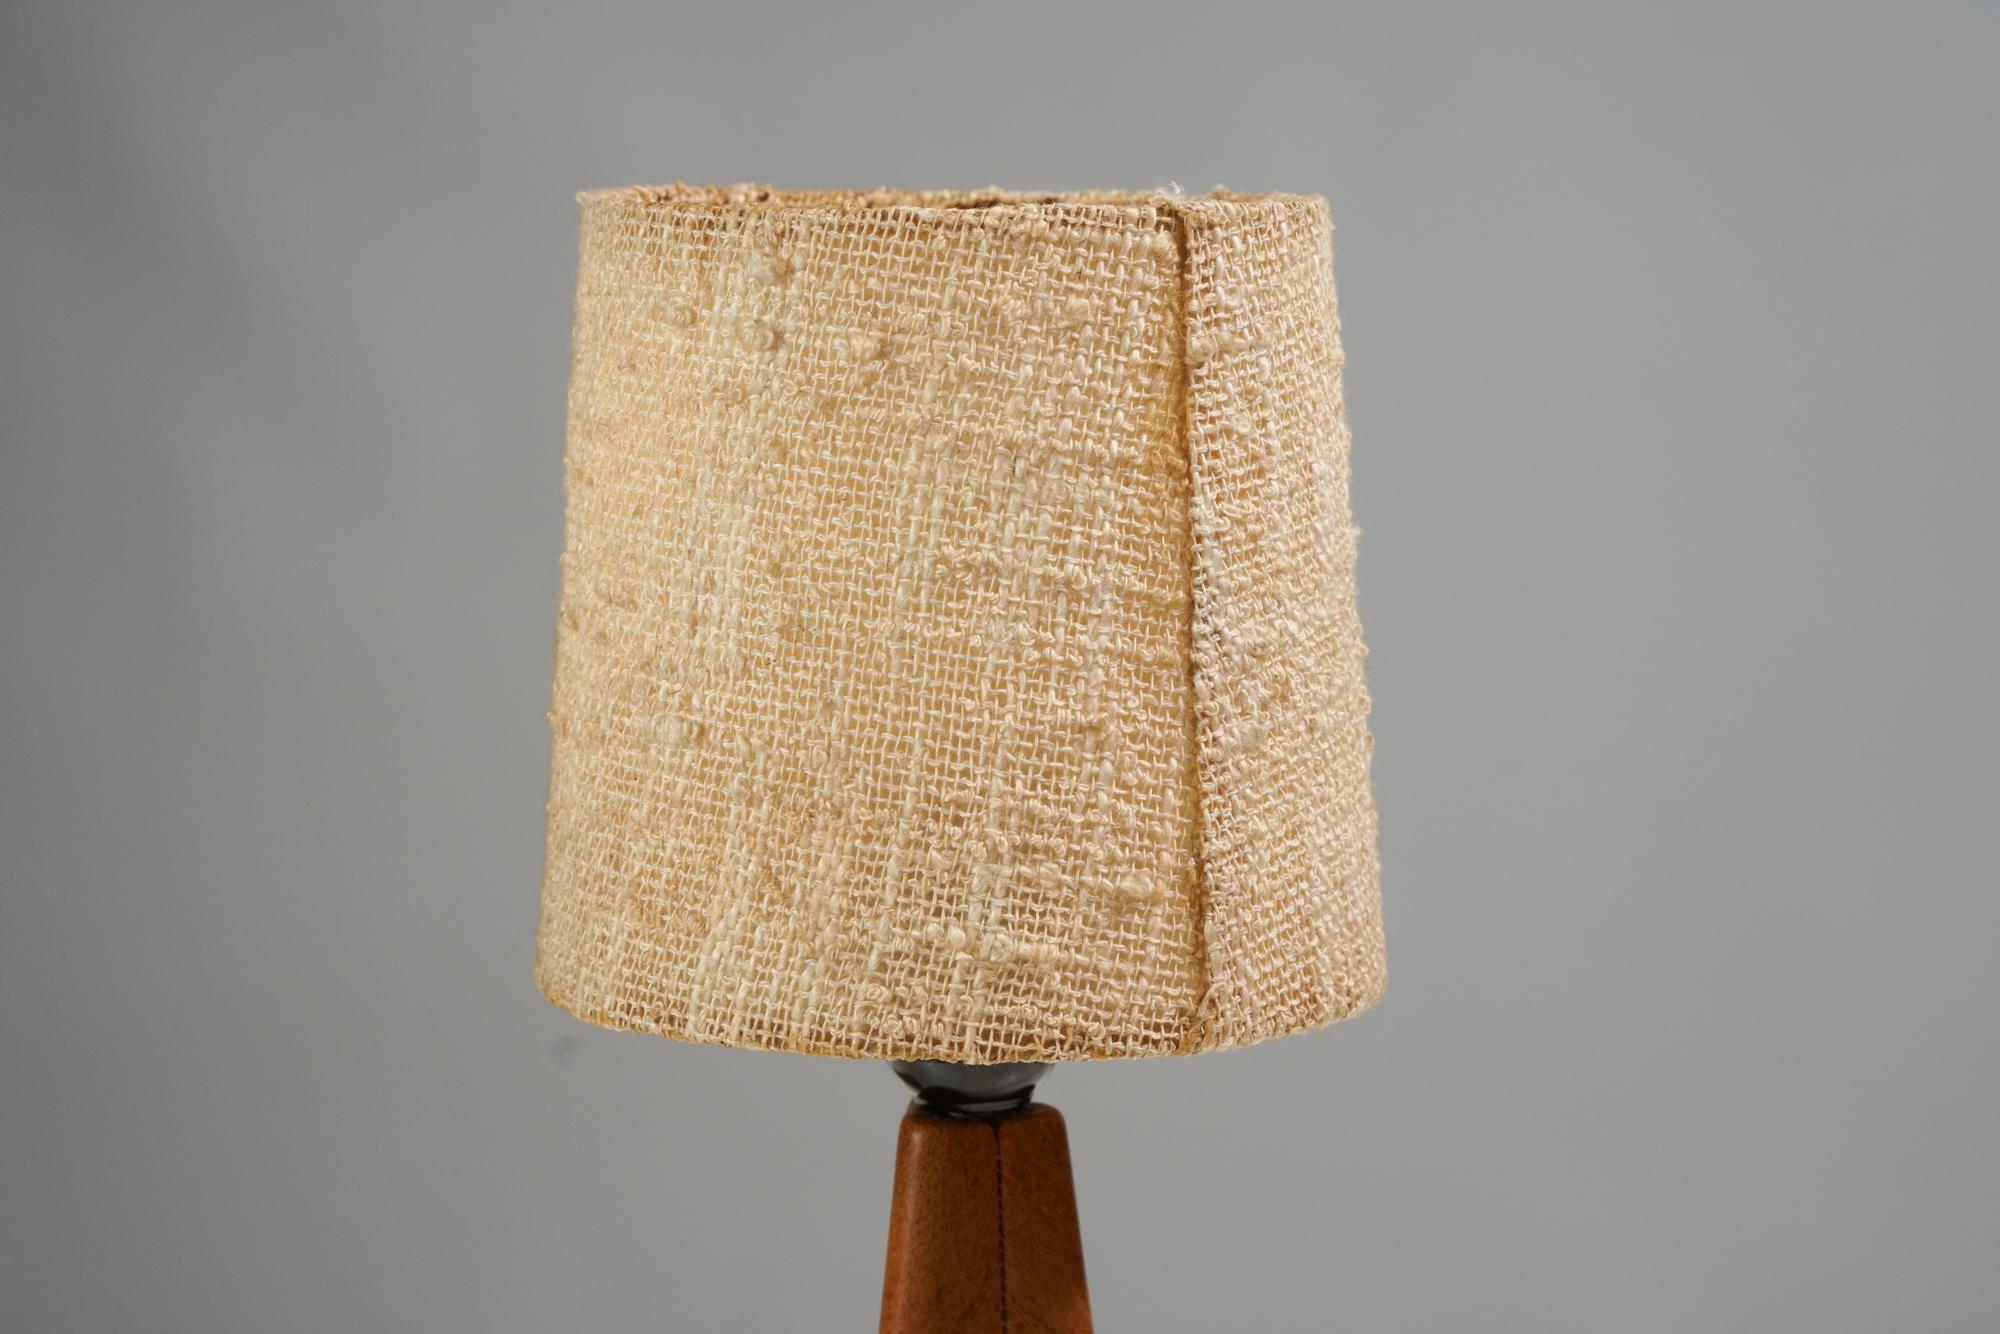 Finnish Set of Two Leather Table Lamps by Lisa Johansson-Pape for Orno, Mid-20th Century For Sale